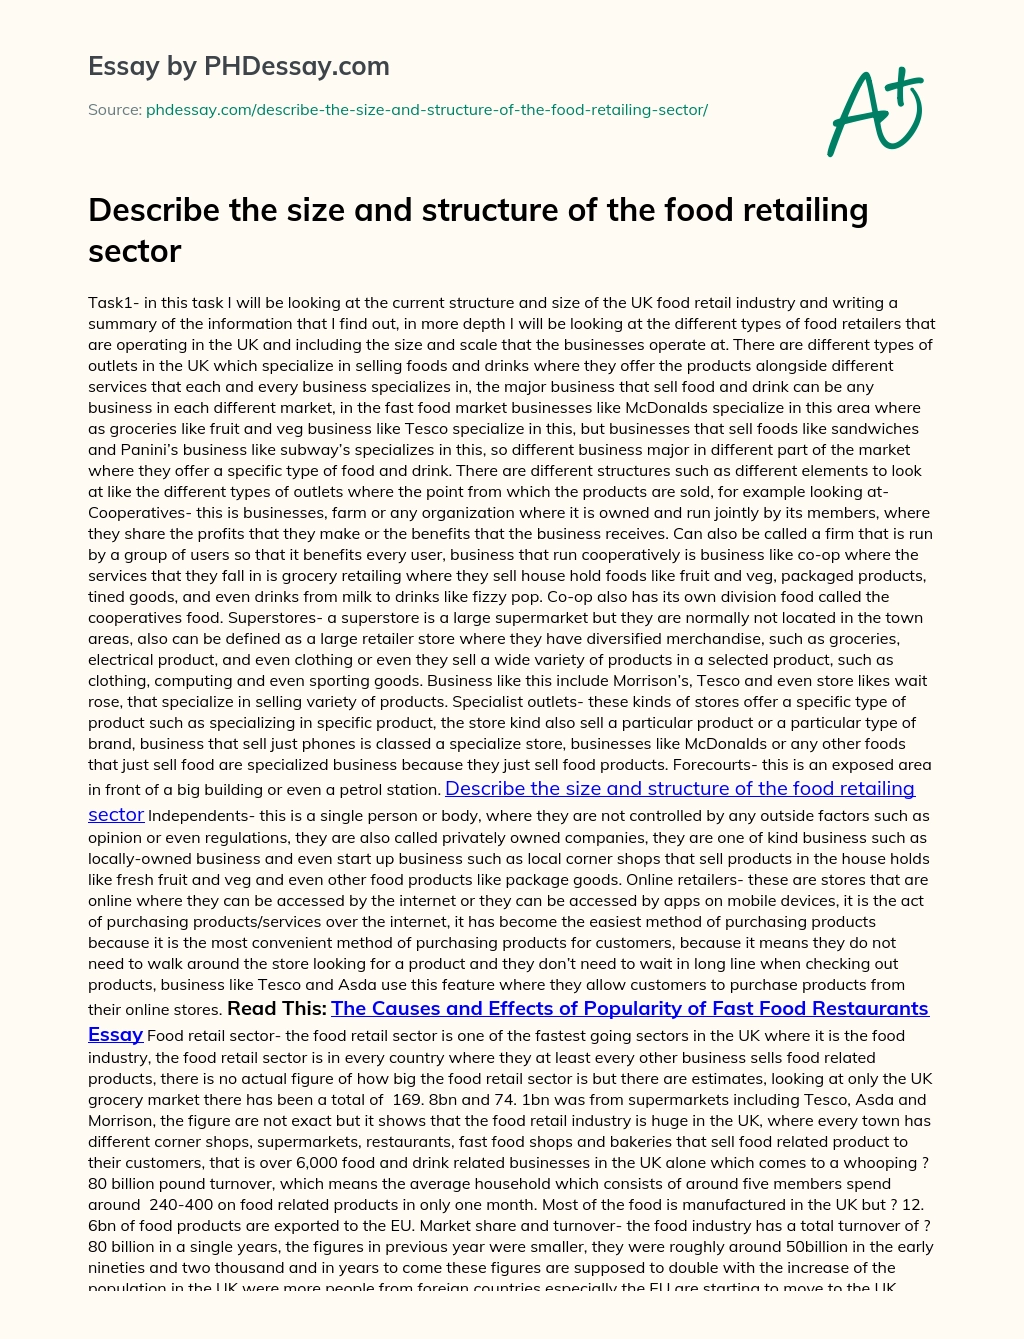 Describe the size and structure of the food retailing sector essay